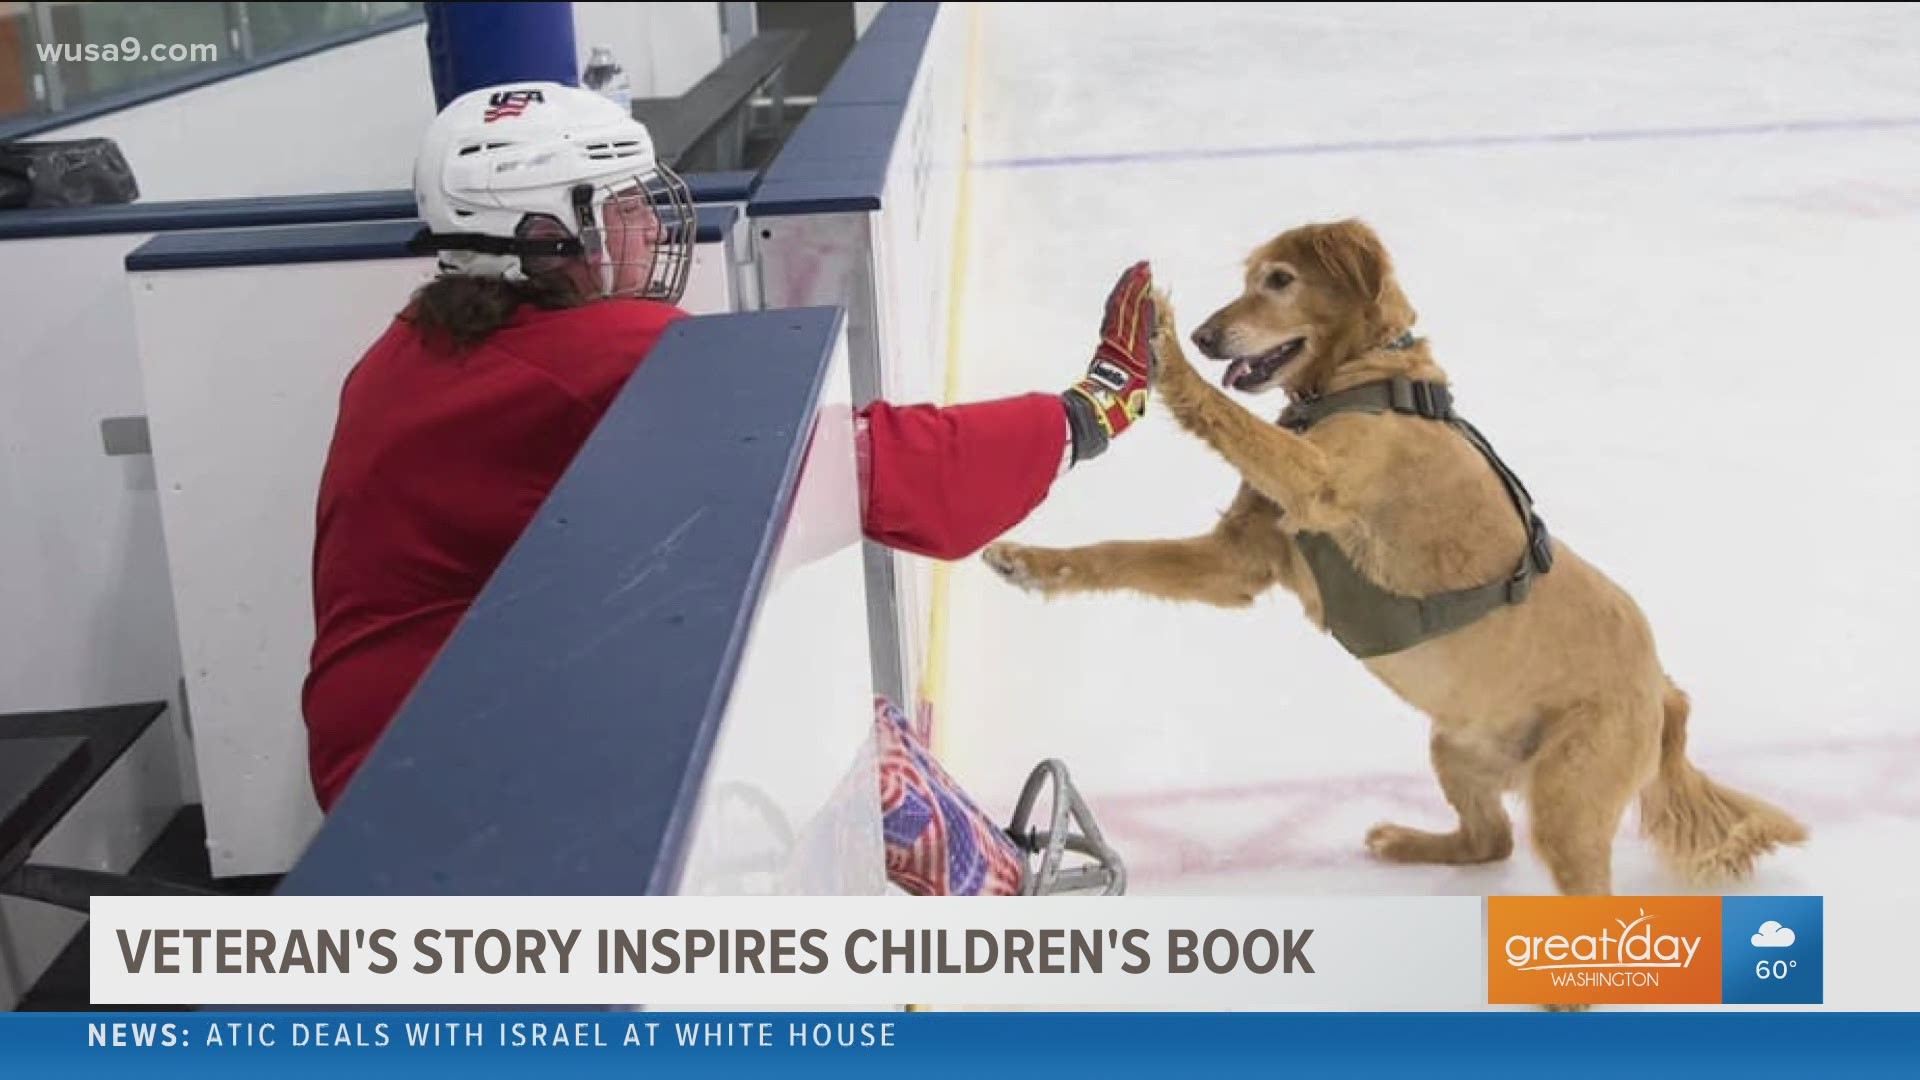 US Army Veteran, Christy Gardner shares her story of training service and therapy dogs and turning it into a children's book.